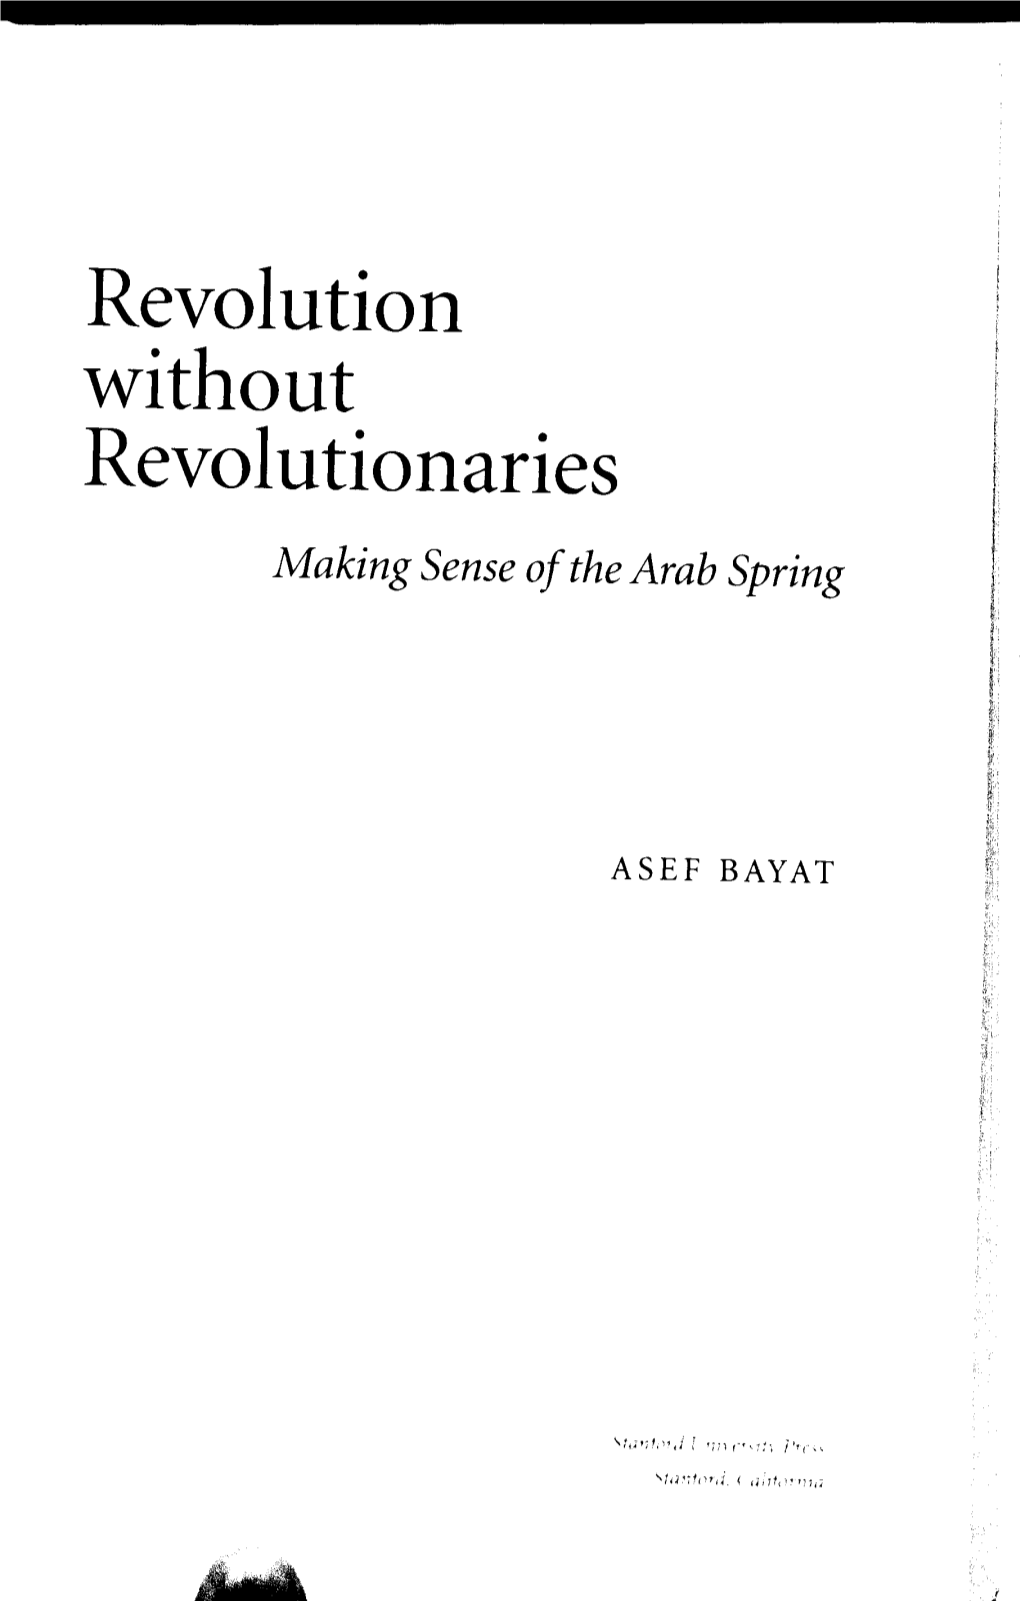 Revolution Without Revolutionaries Making Sense of the Arab Spring